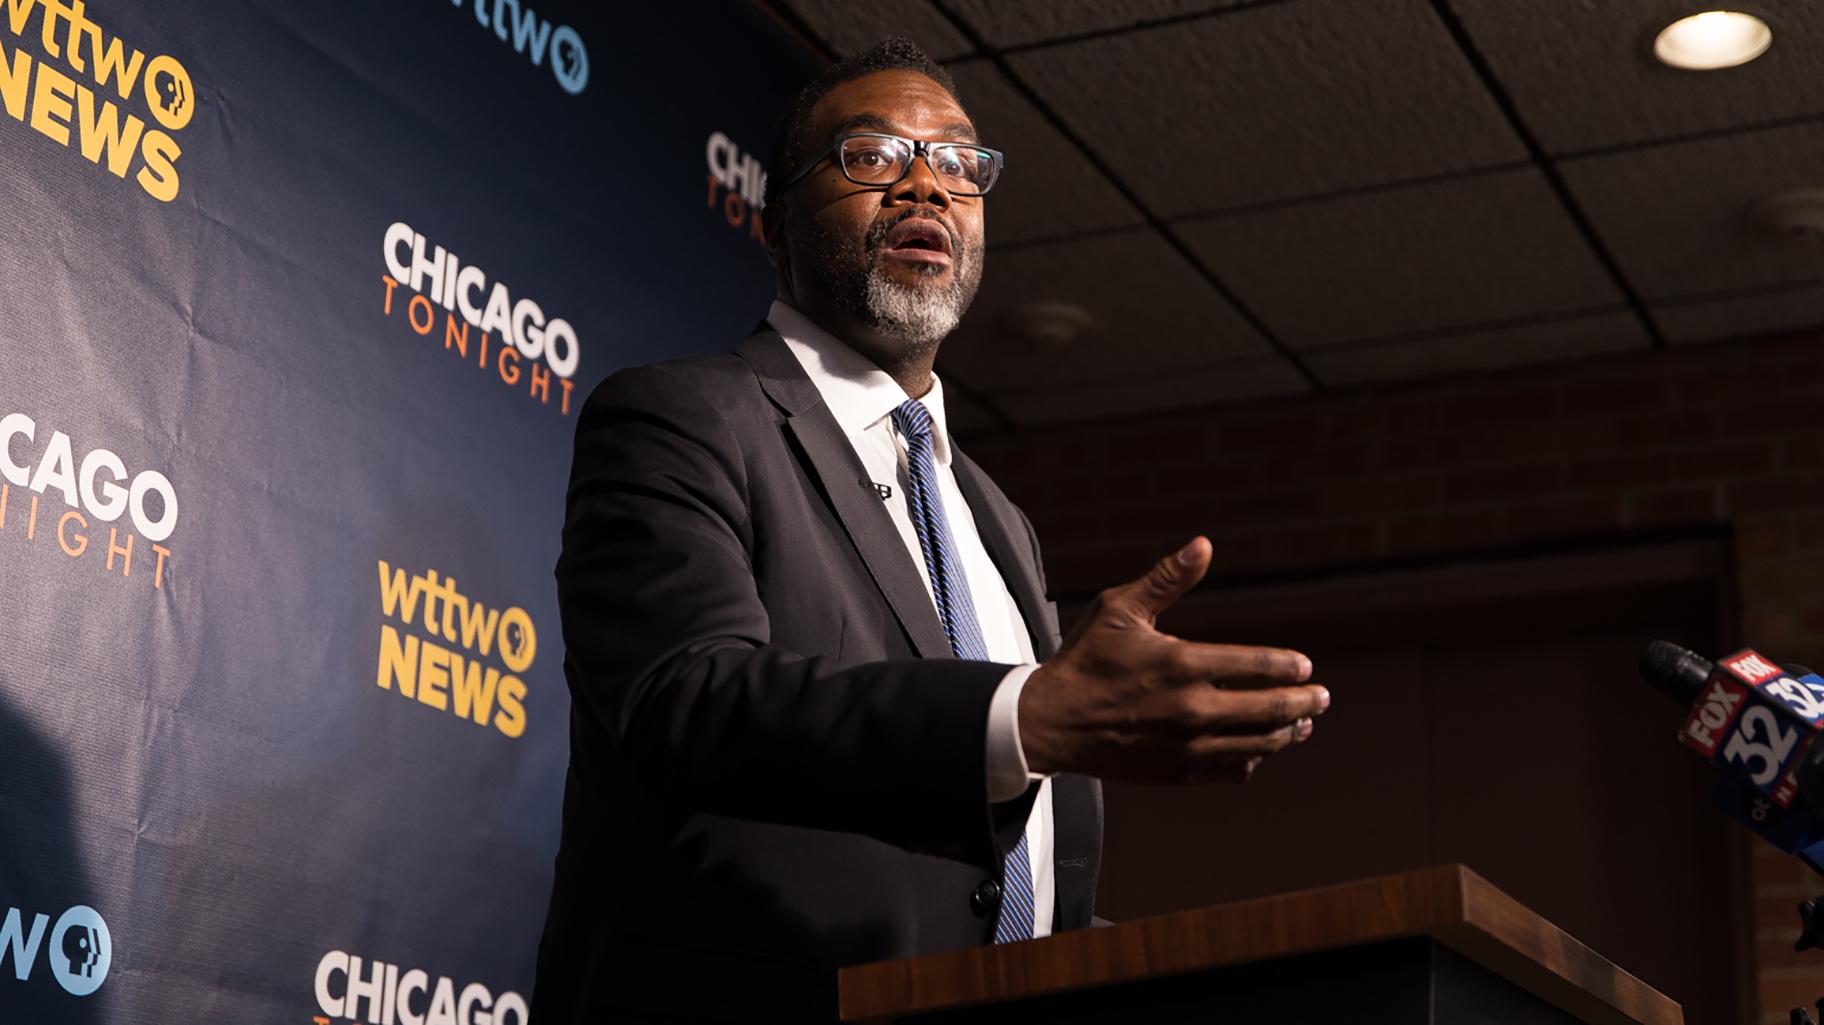 Cook County Commissioner Brandon Johnson, a candidate for Chicago mayor, addresses a question at a press conference about Mayor Lori Lightfoot's mansplaining comment at the forum speaks on Feb. 7, 2023.  (Michael Izquierdo / WTTW News)